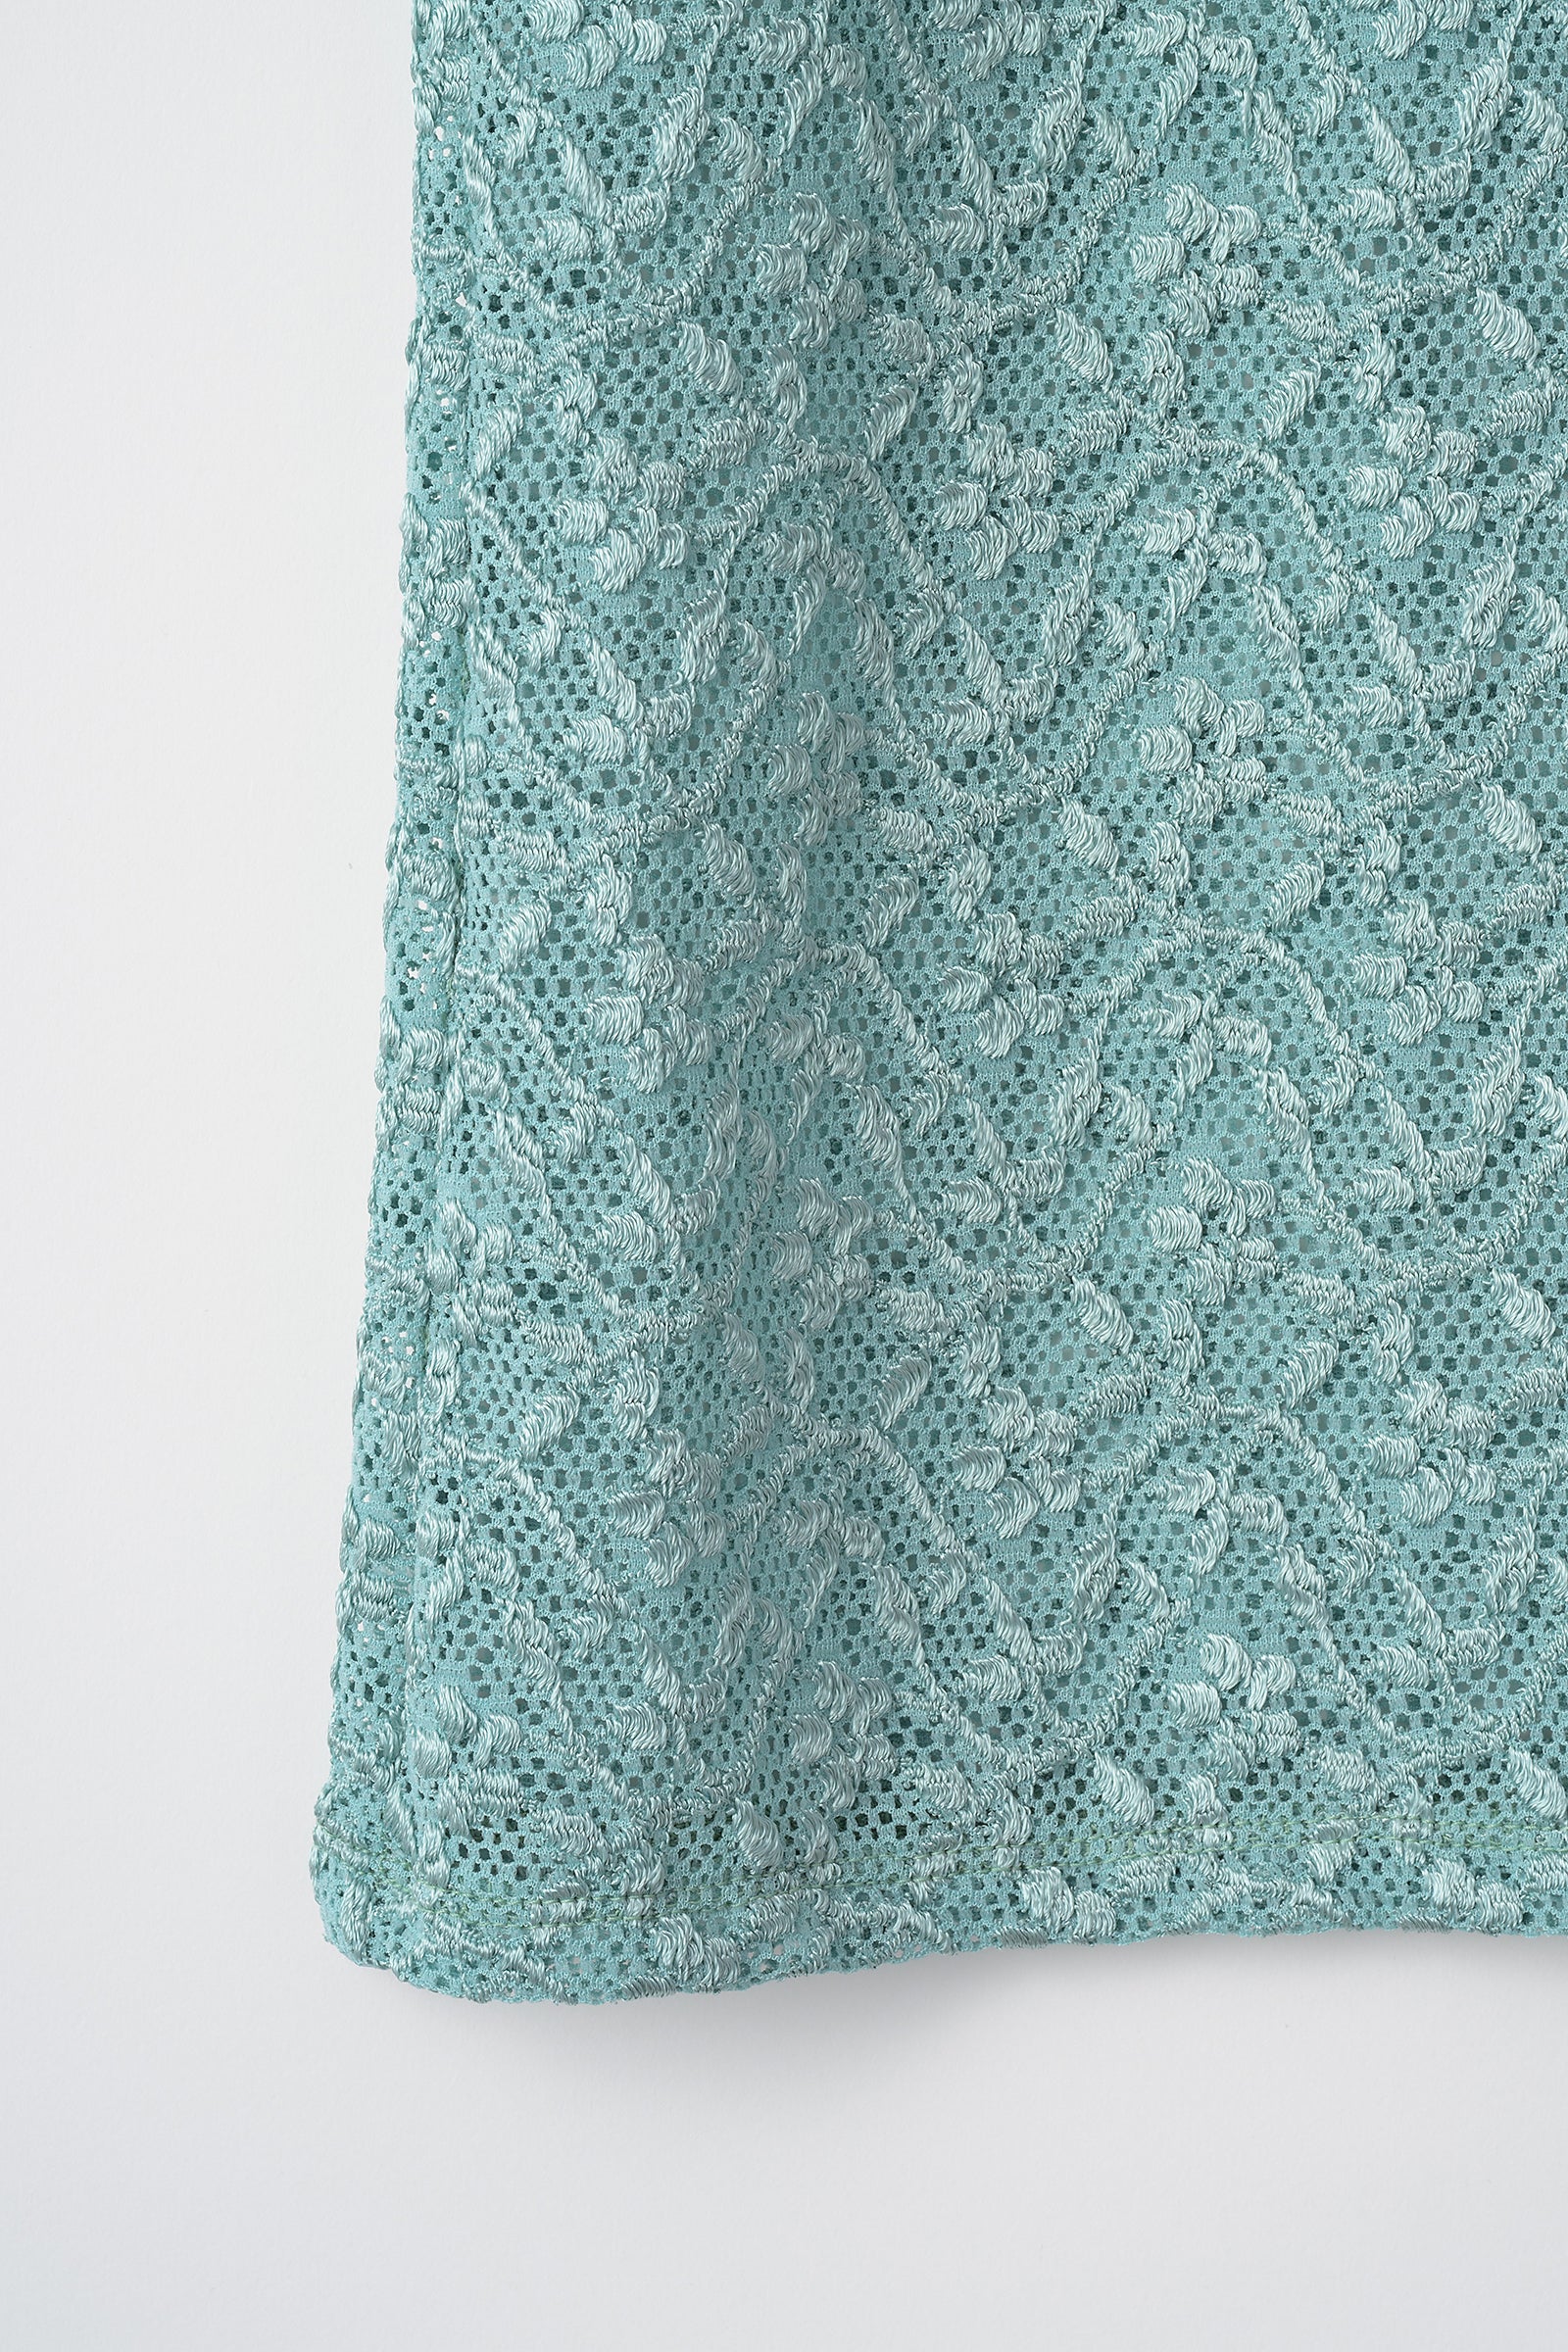 Stretch lace sleeveless top (Mint)